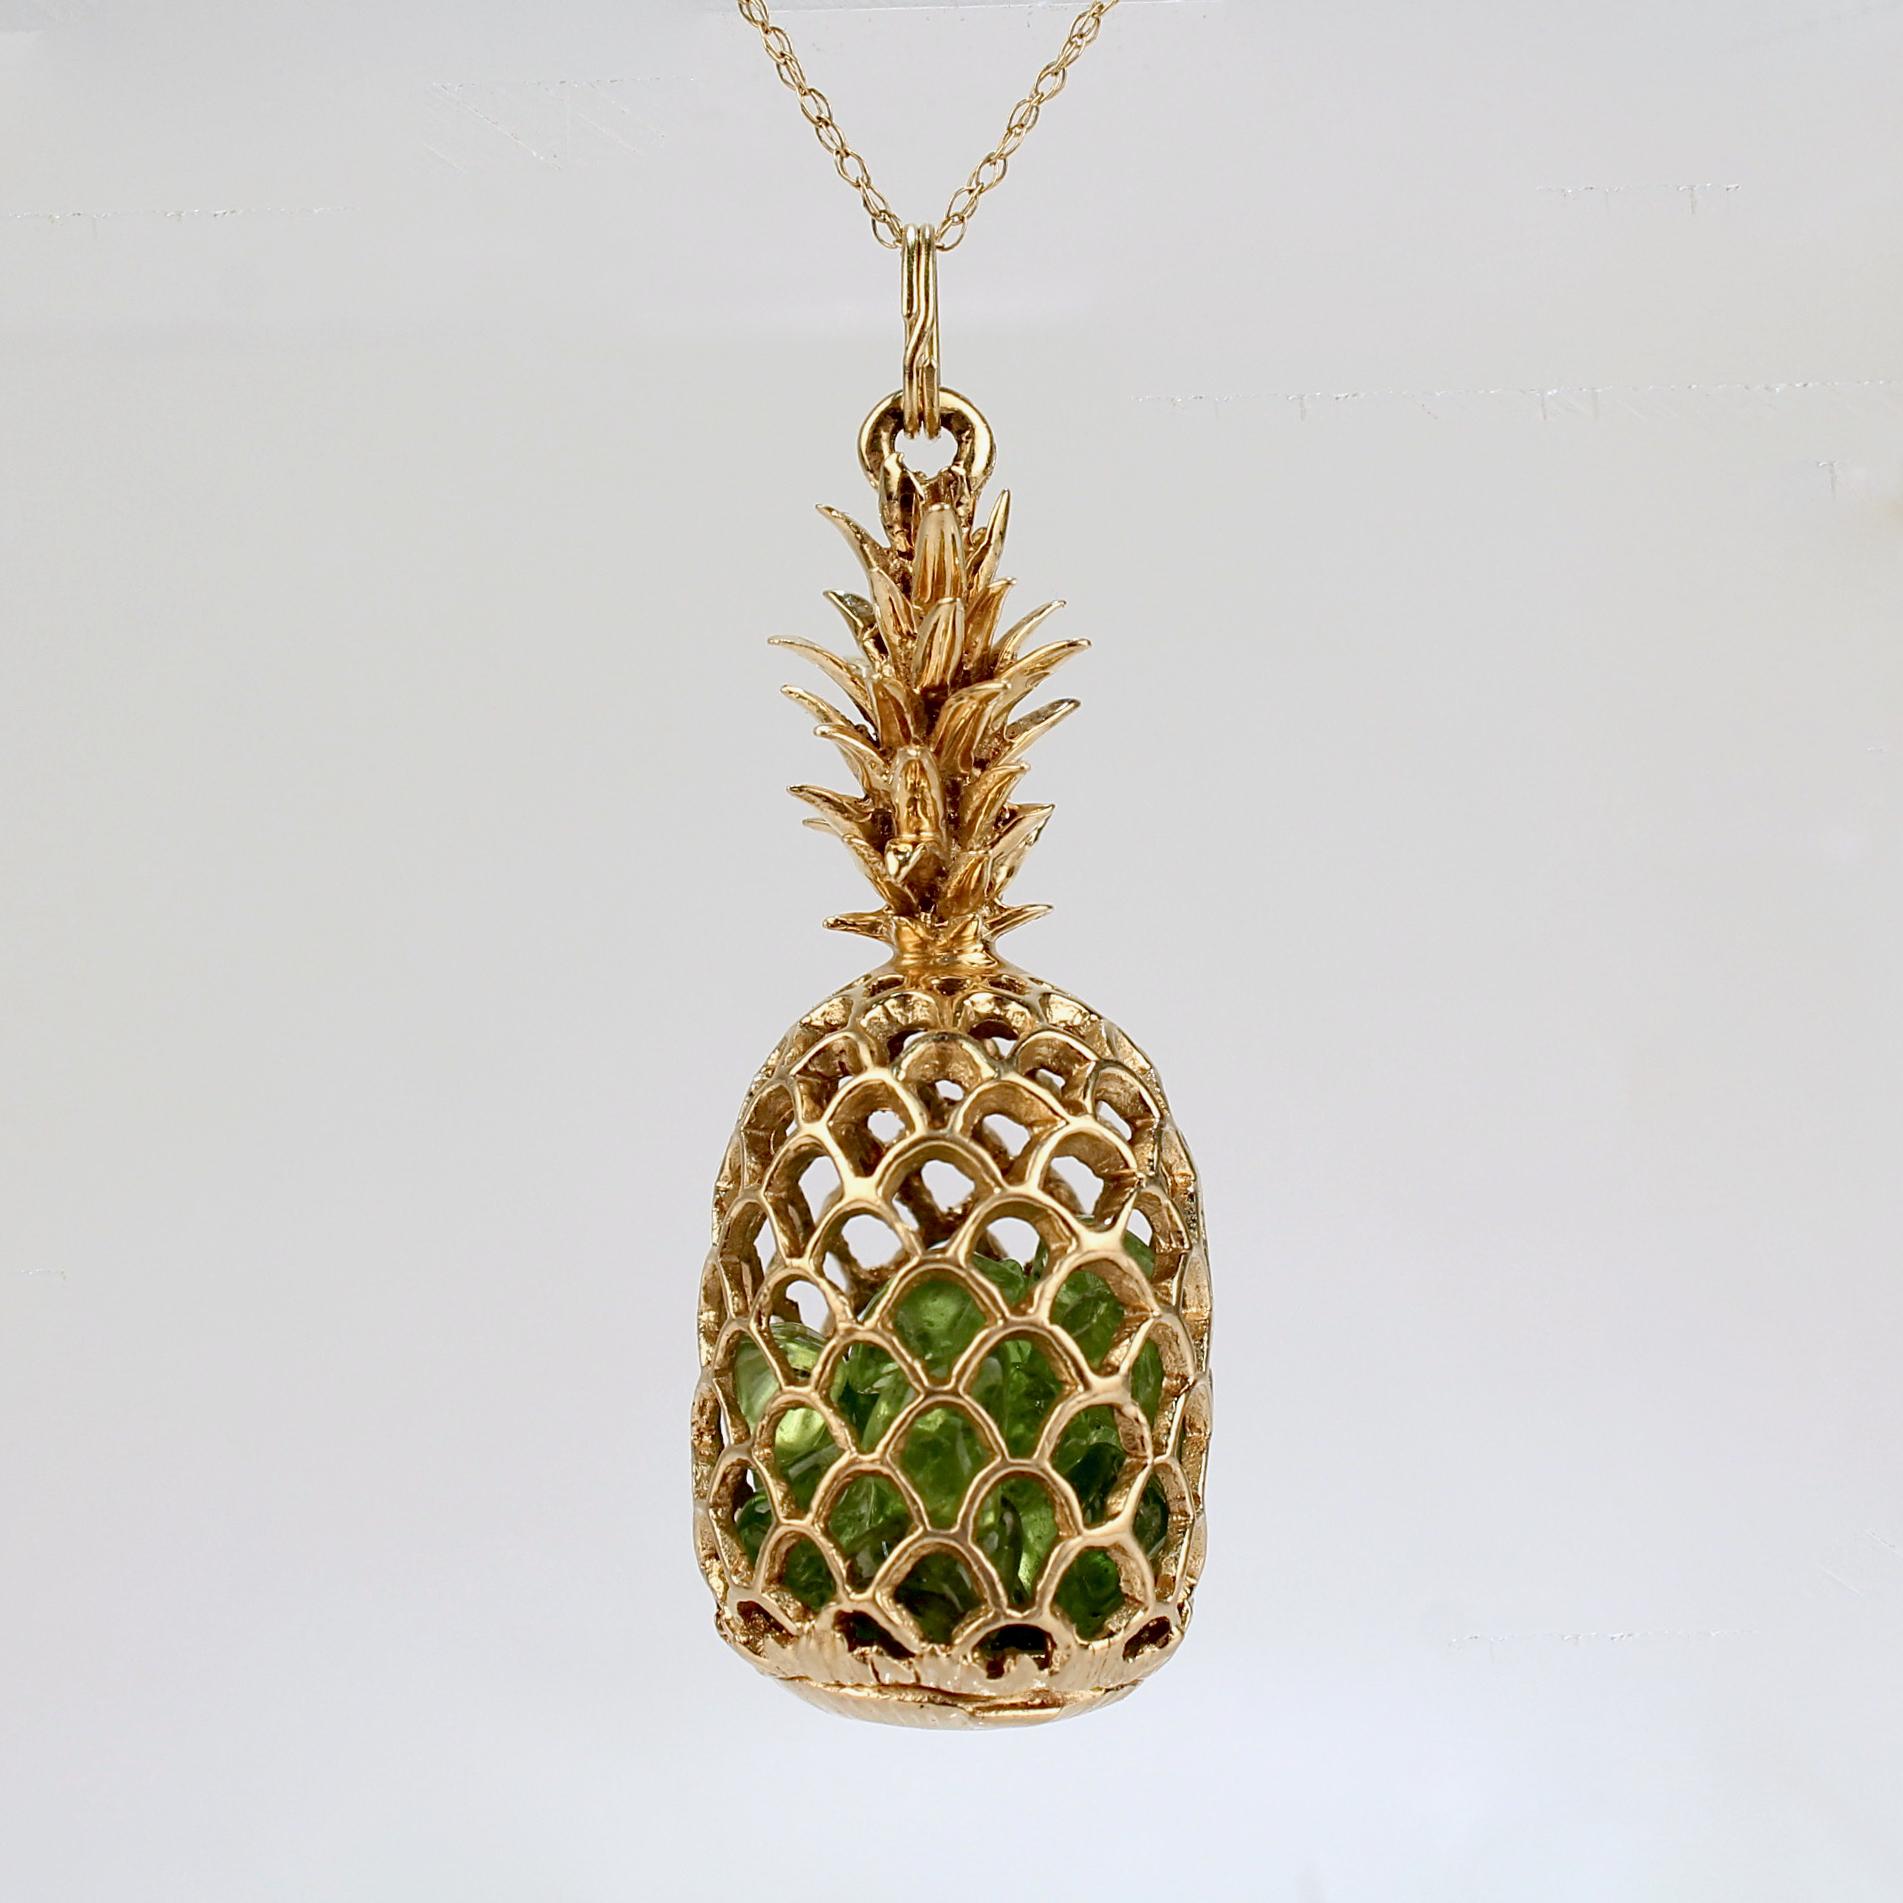 A very fine NaHoku gold and emerald pineapple pendant.

With more than 2 dozen smooth uncut emeralds encased in a 14k gold pineapple pendant.

The pineapple functions as a locket with a closure that opens and closes on the bottom of the